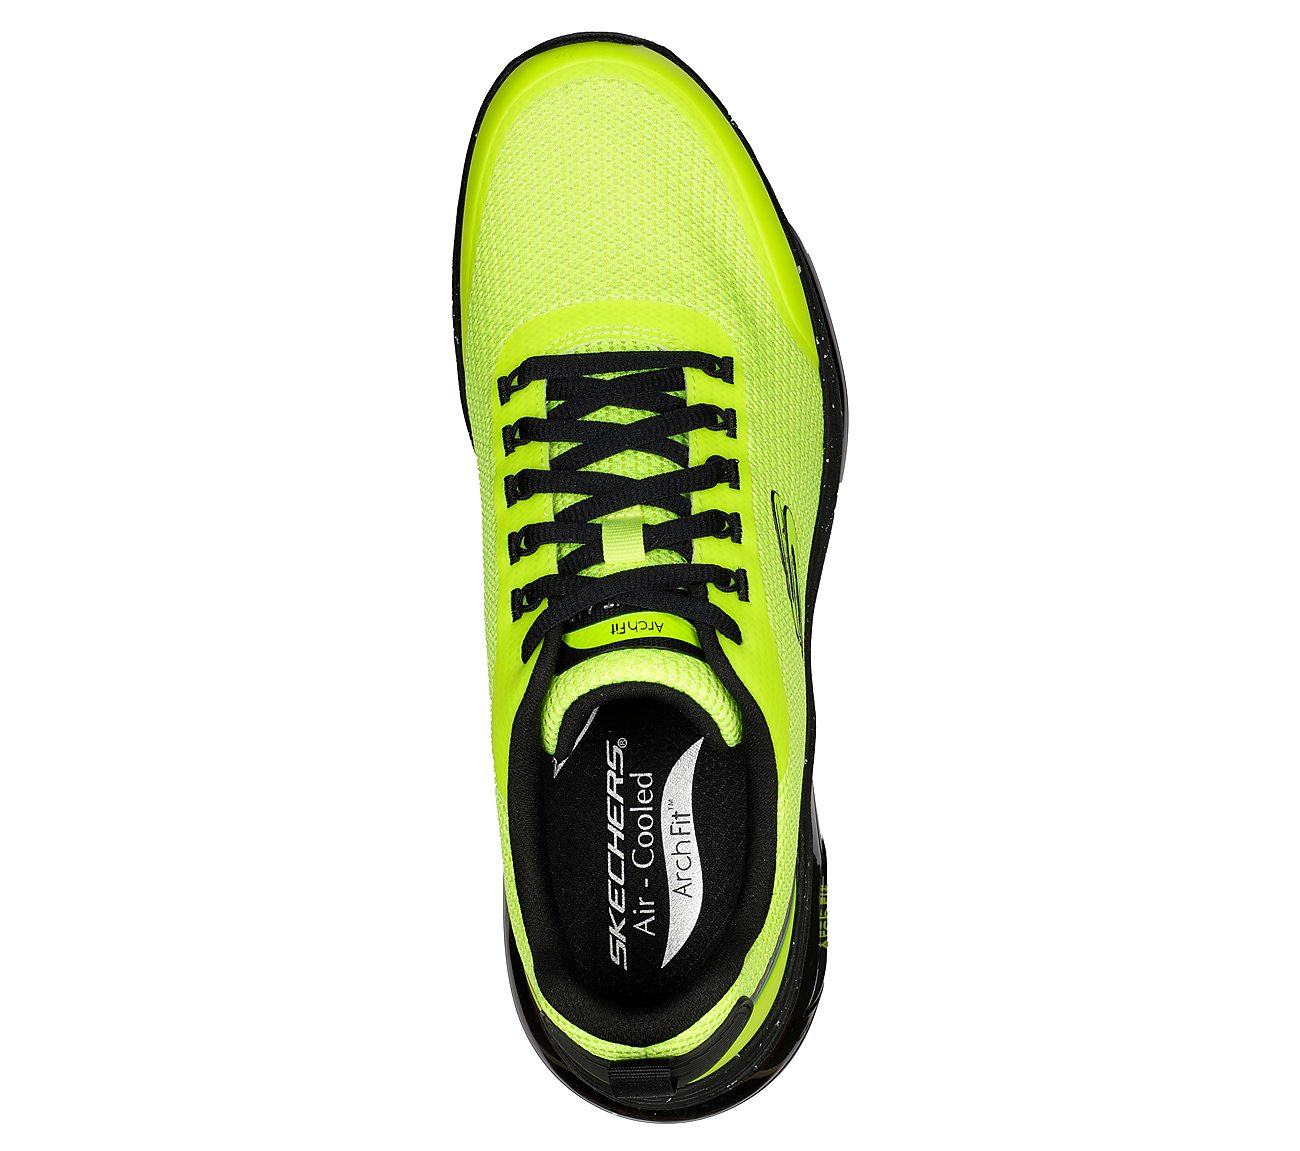 ARCH FIT ELEMENT AIR, LIME/BLACK Footwear Top View